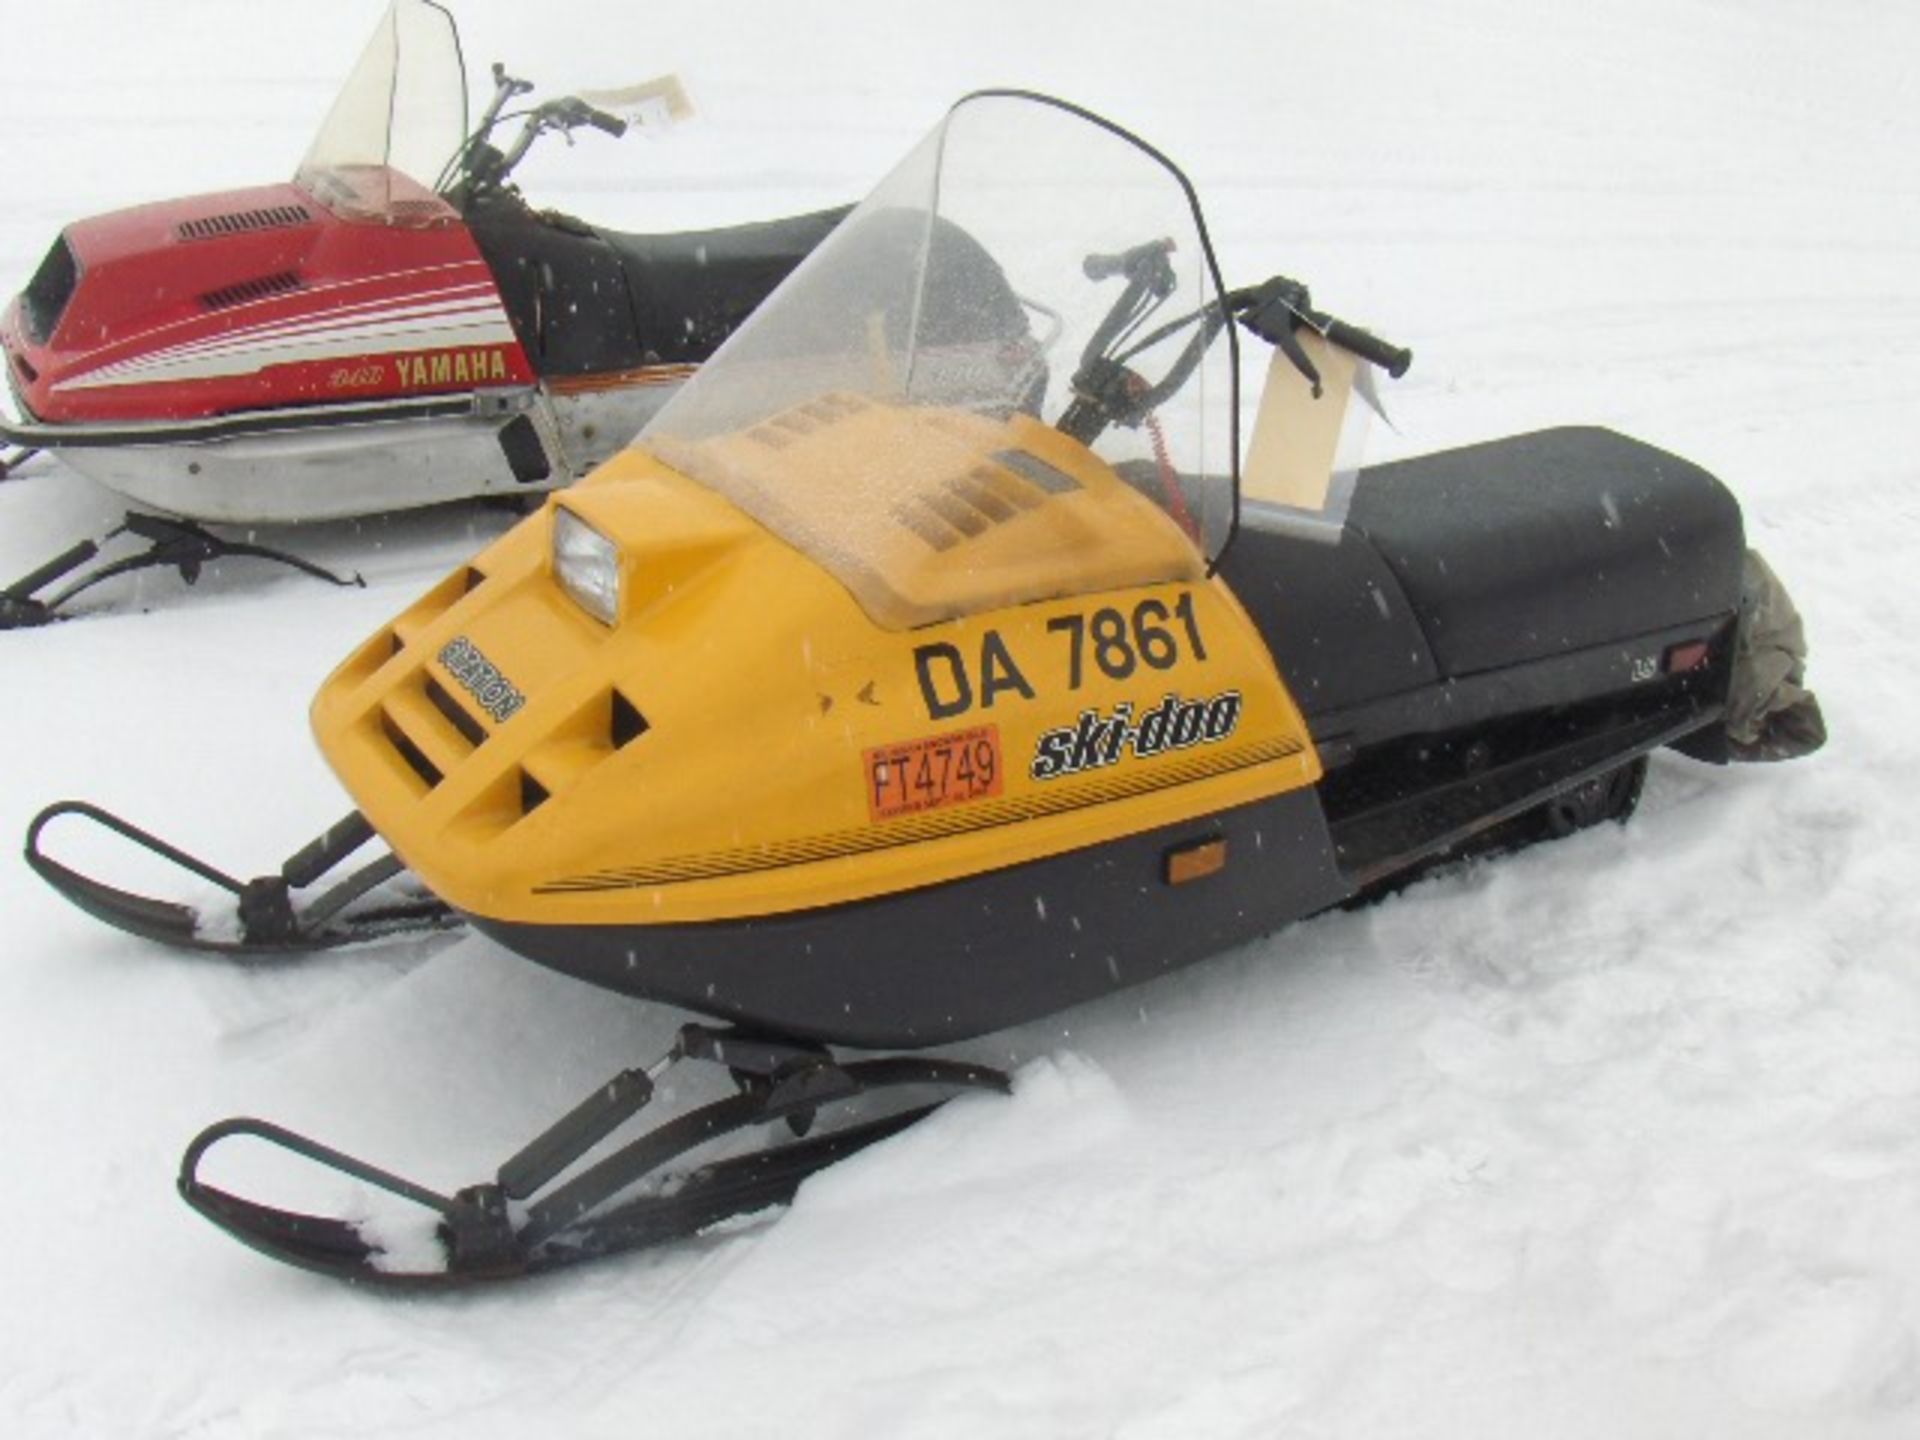 1987 SKI DOO 250 CITATION  321700320 snowmobile, owner started at time of auction check in,